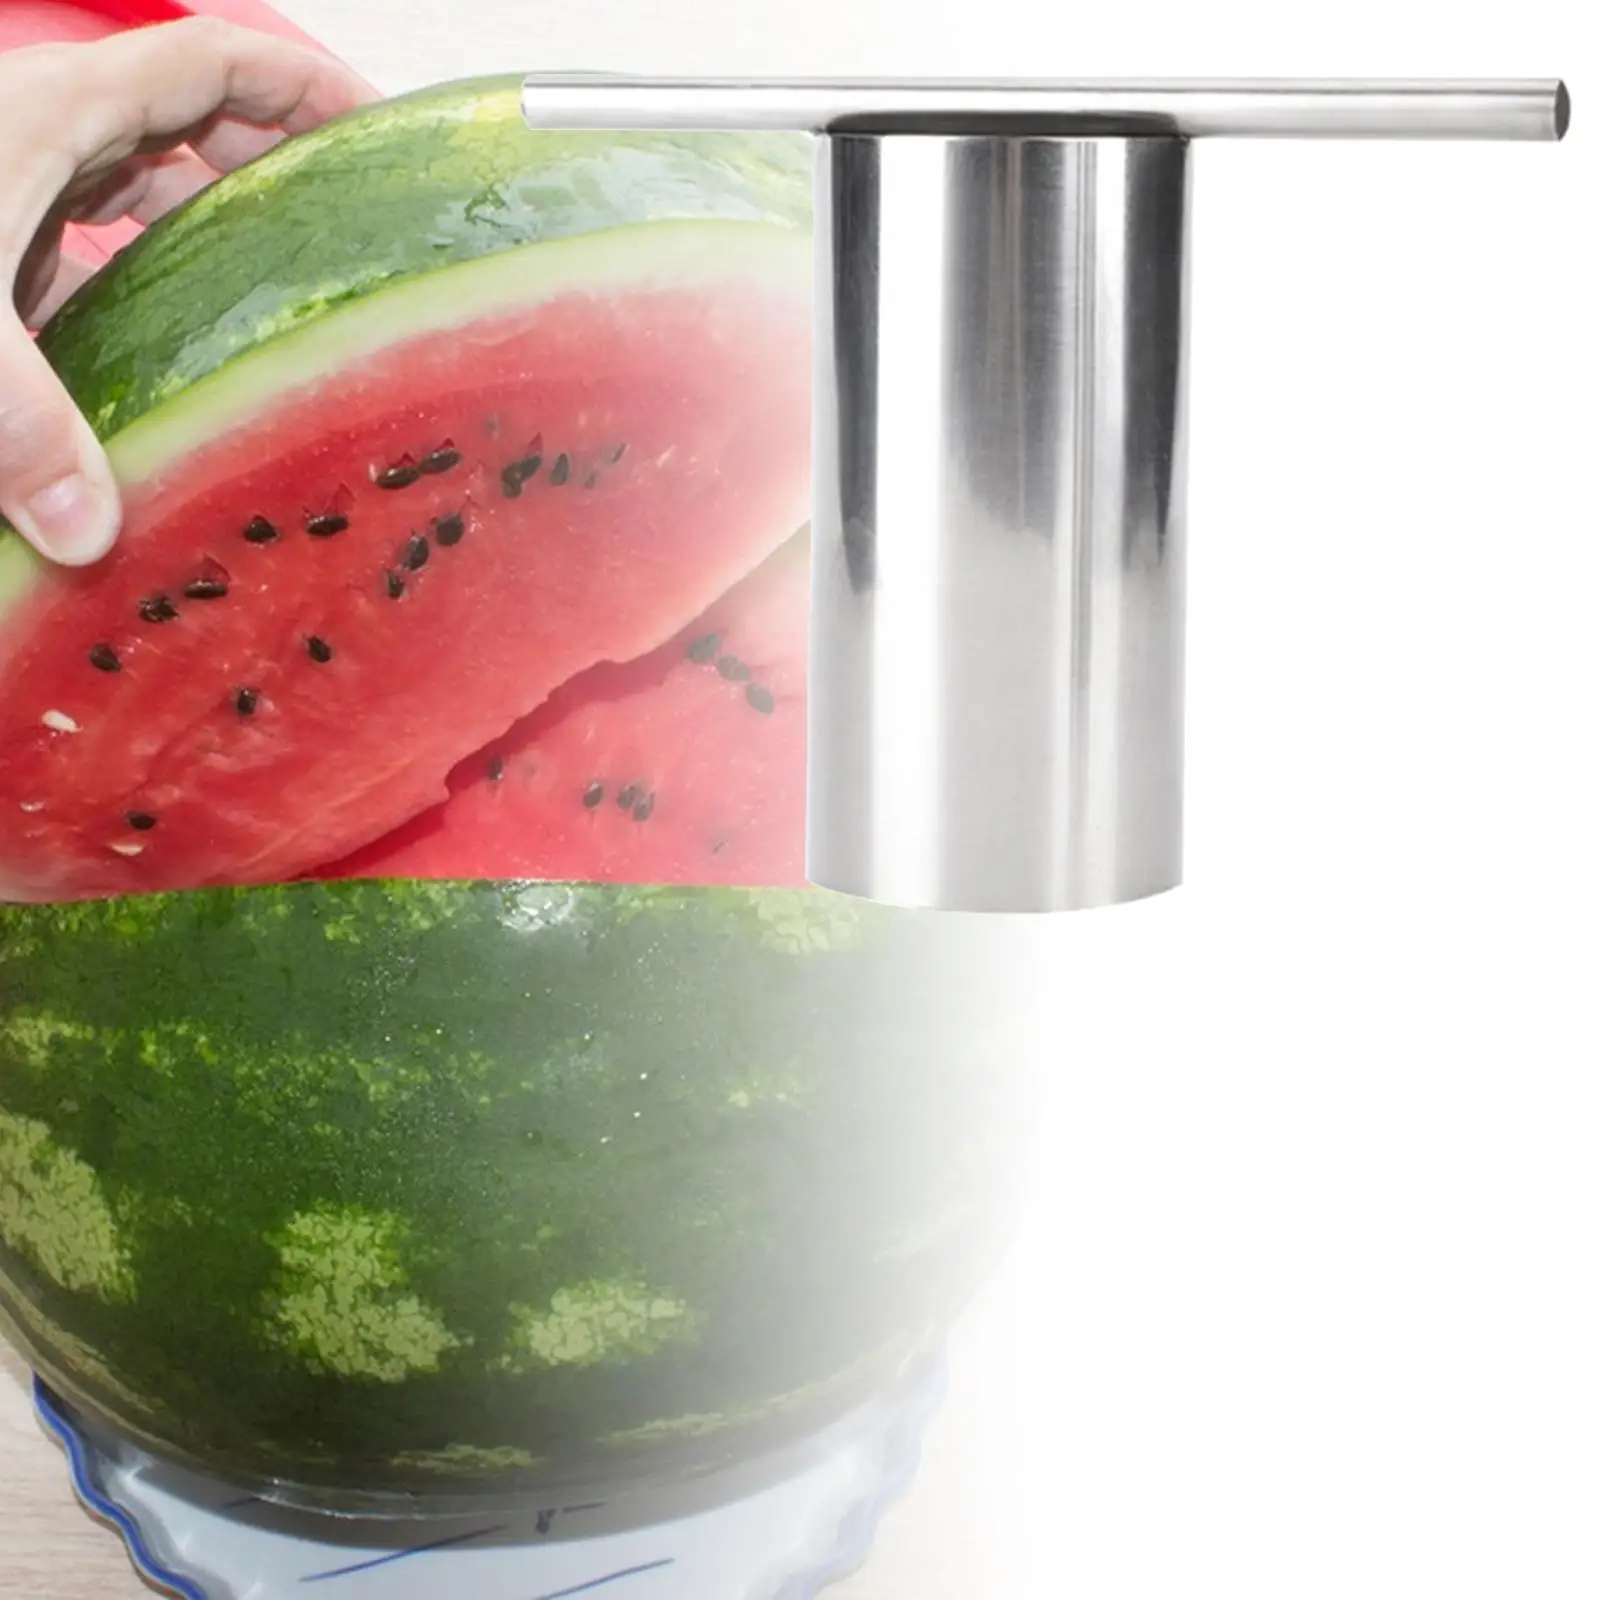 Watermelon Core Remover Kitchen Corer Tool Easy Coring Kitchen Gadgets Melon Slicer Melon Opener for for Fruits Vegetable Tool